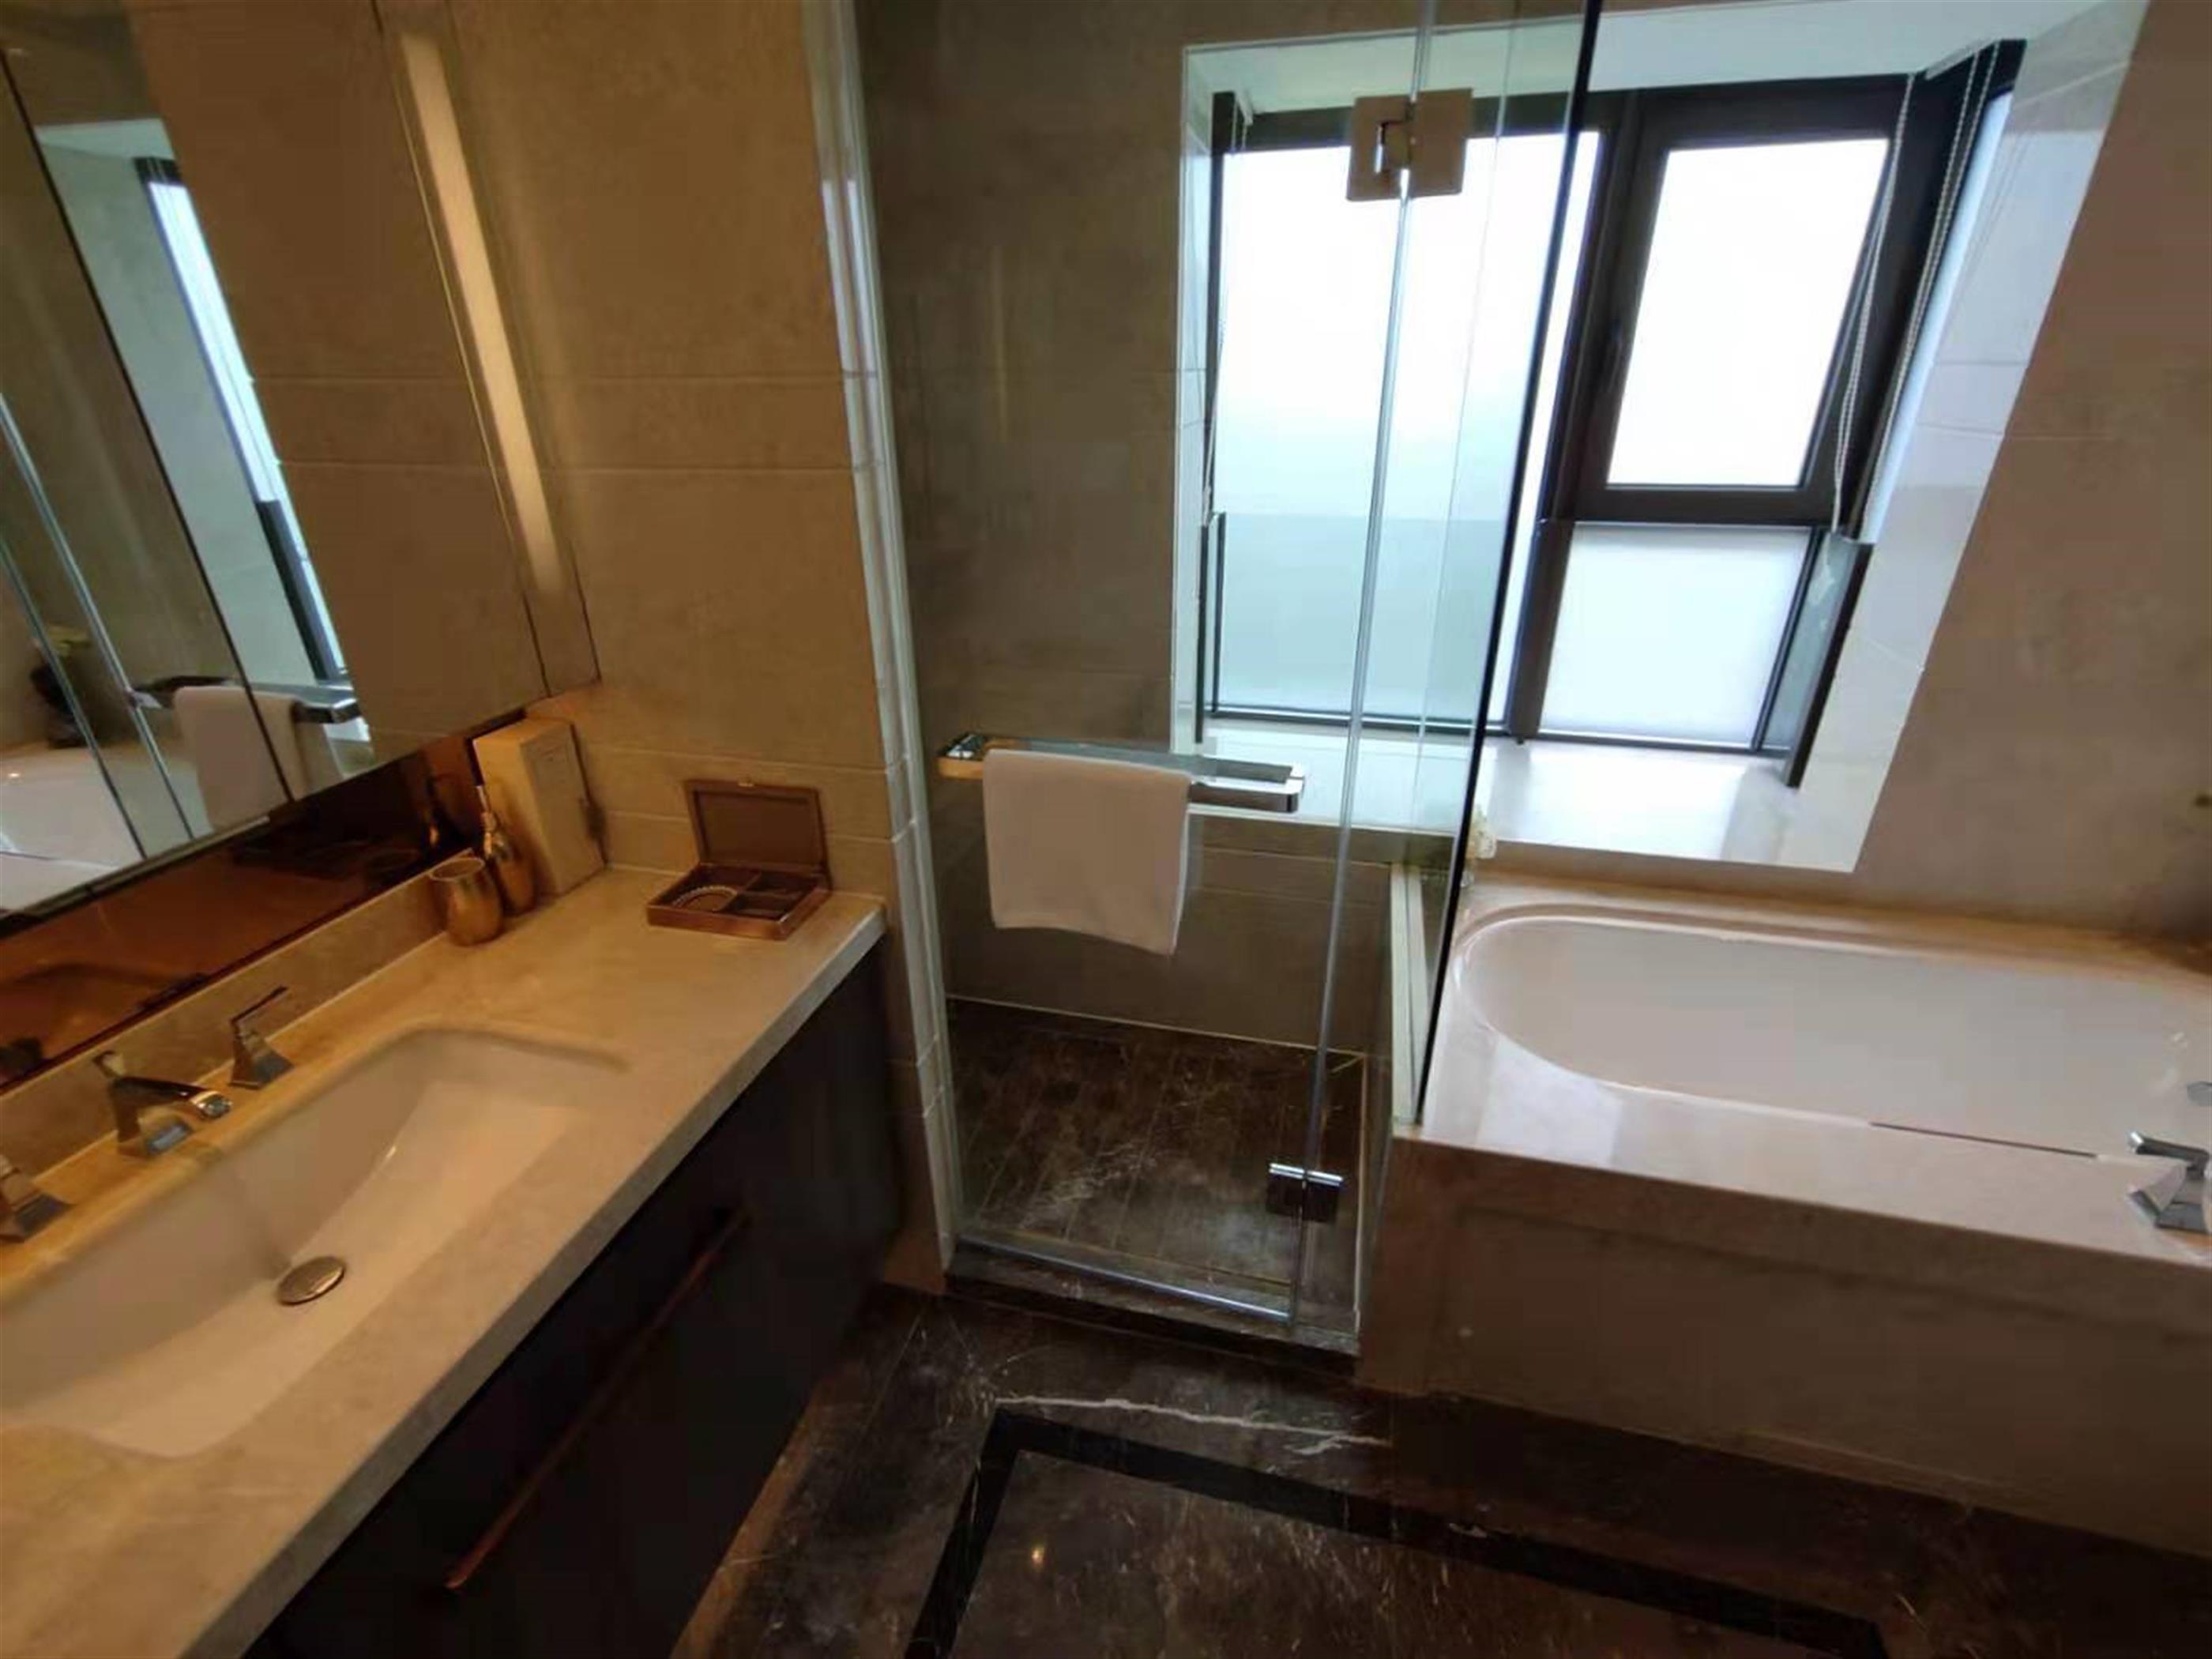 Bathroom with tub Luxurious FFC 3BR+Office Service Apartment nr LN 1/9/10/12 for Rent in Shanghai